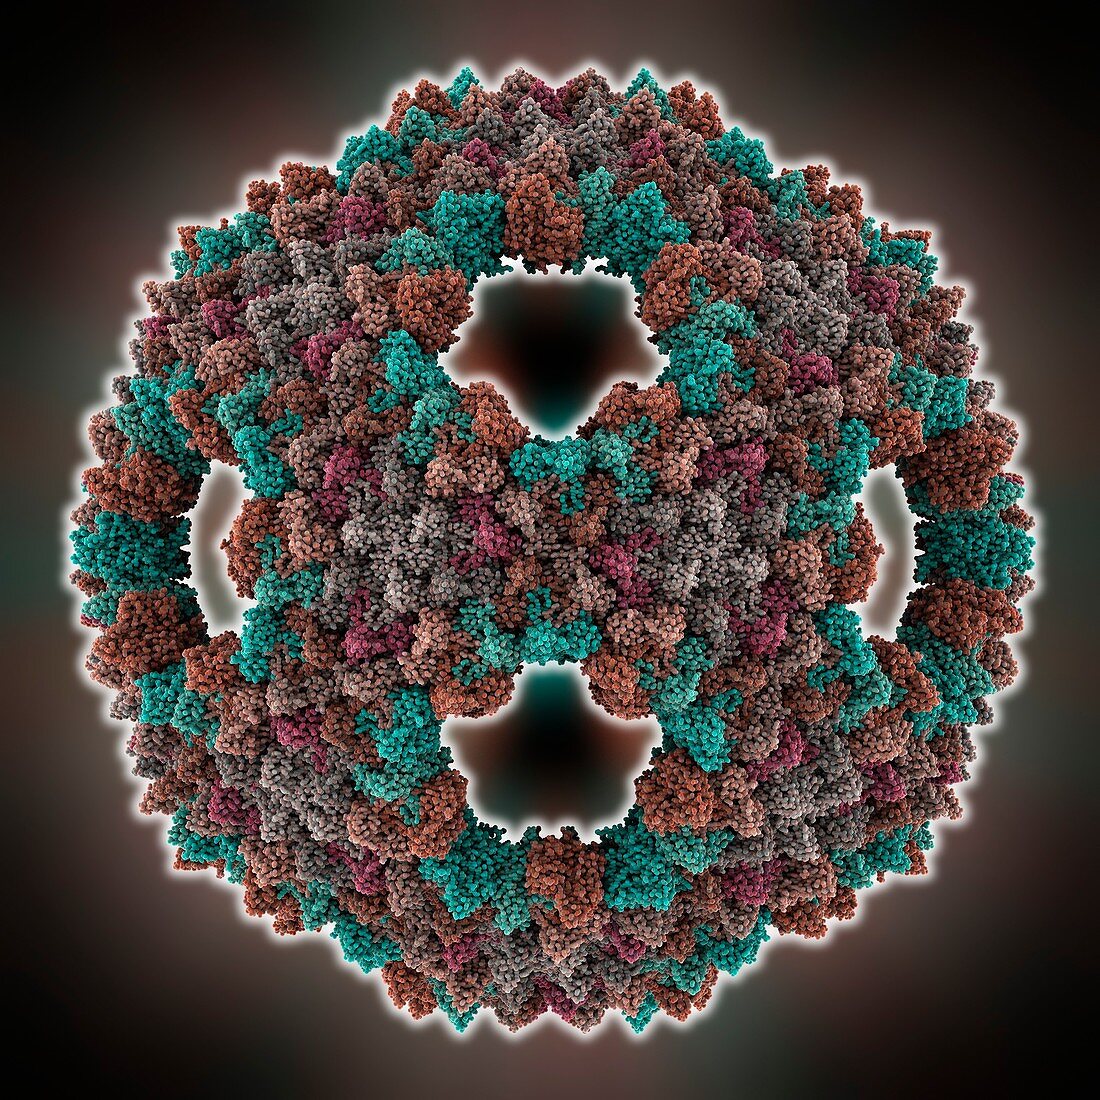 Bacteriophage capsid protein shell